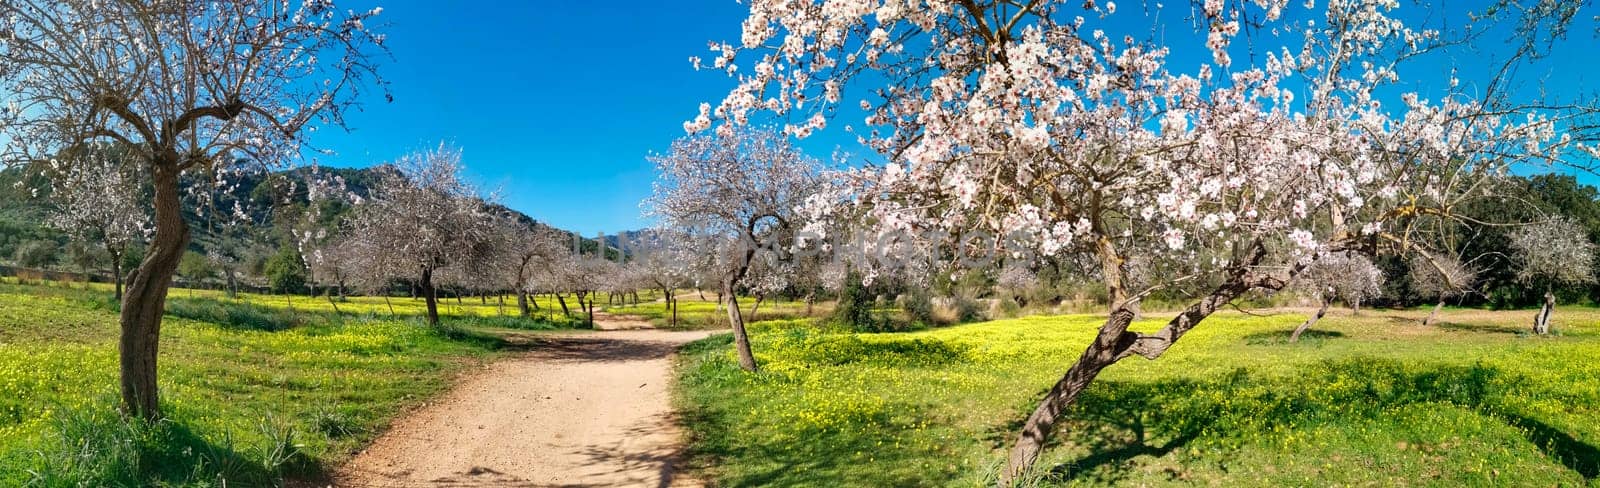 A rustic path leads through a vibrant display of almond blossoms, with the promise of spring in the air